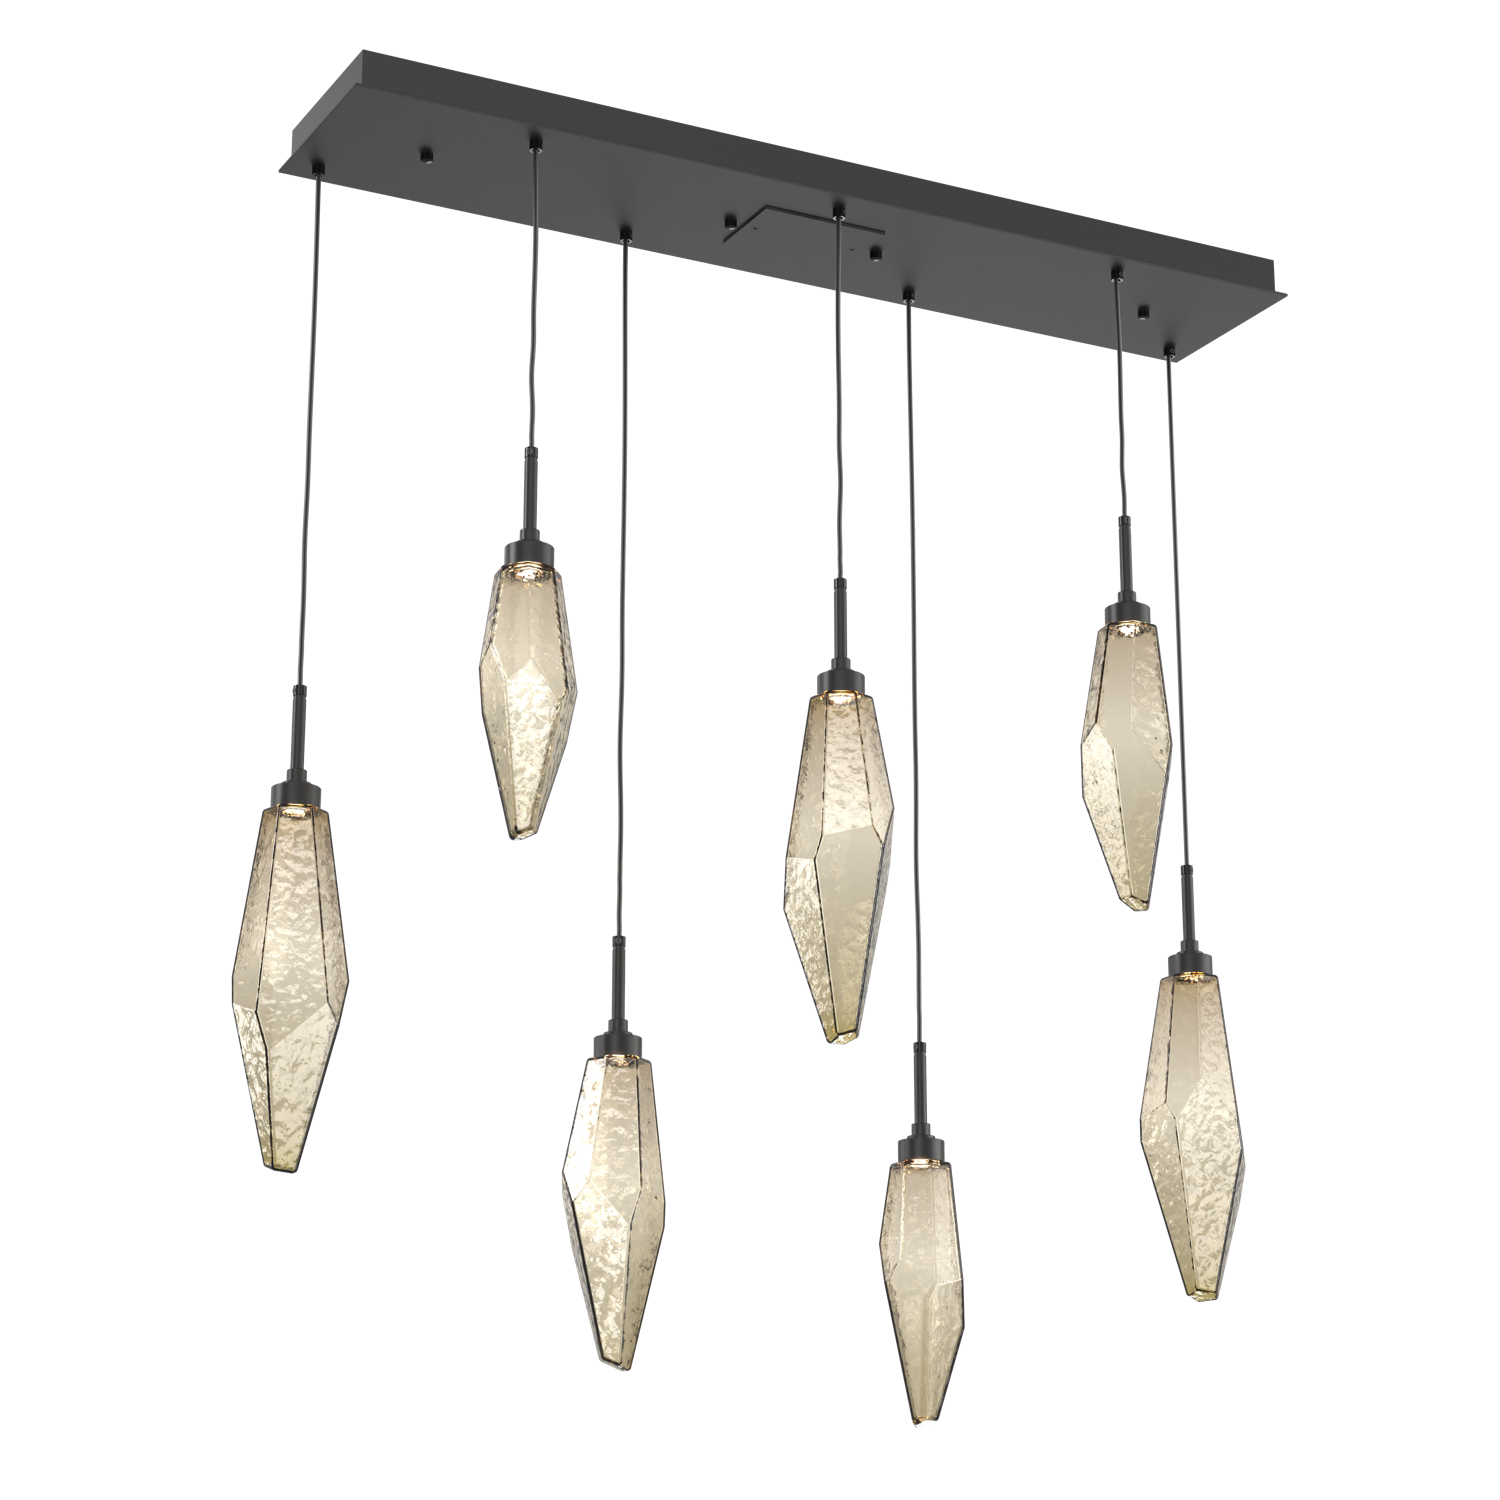 PLB0050-07-MB-CB-Hammerton-Studio-Rock-Crystal-7-light-linear-pendant-chandelier-with-matte-black-finish-and-chilled-bronze-blown-glass-shades-and-LED-lamping